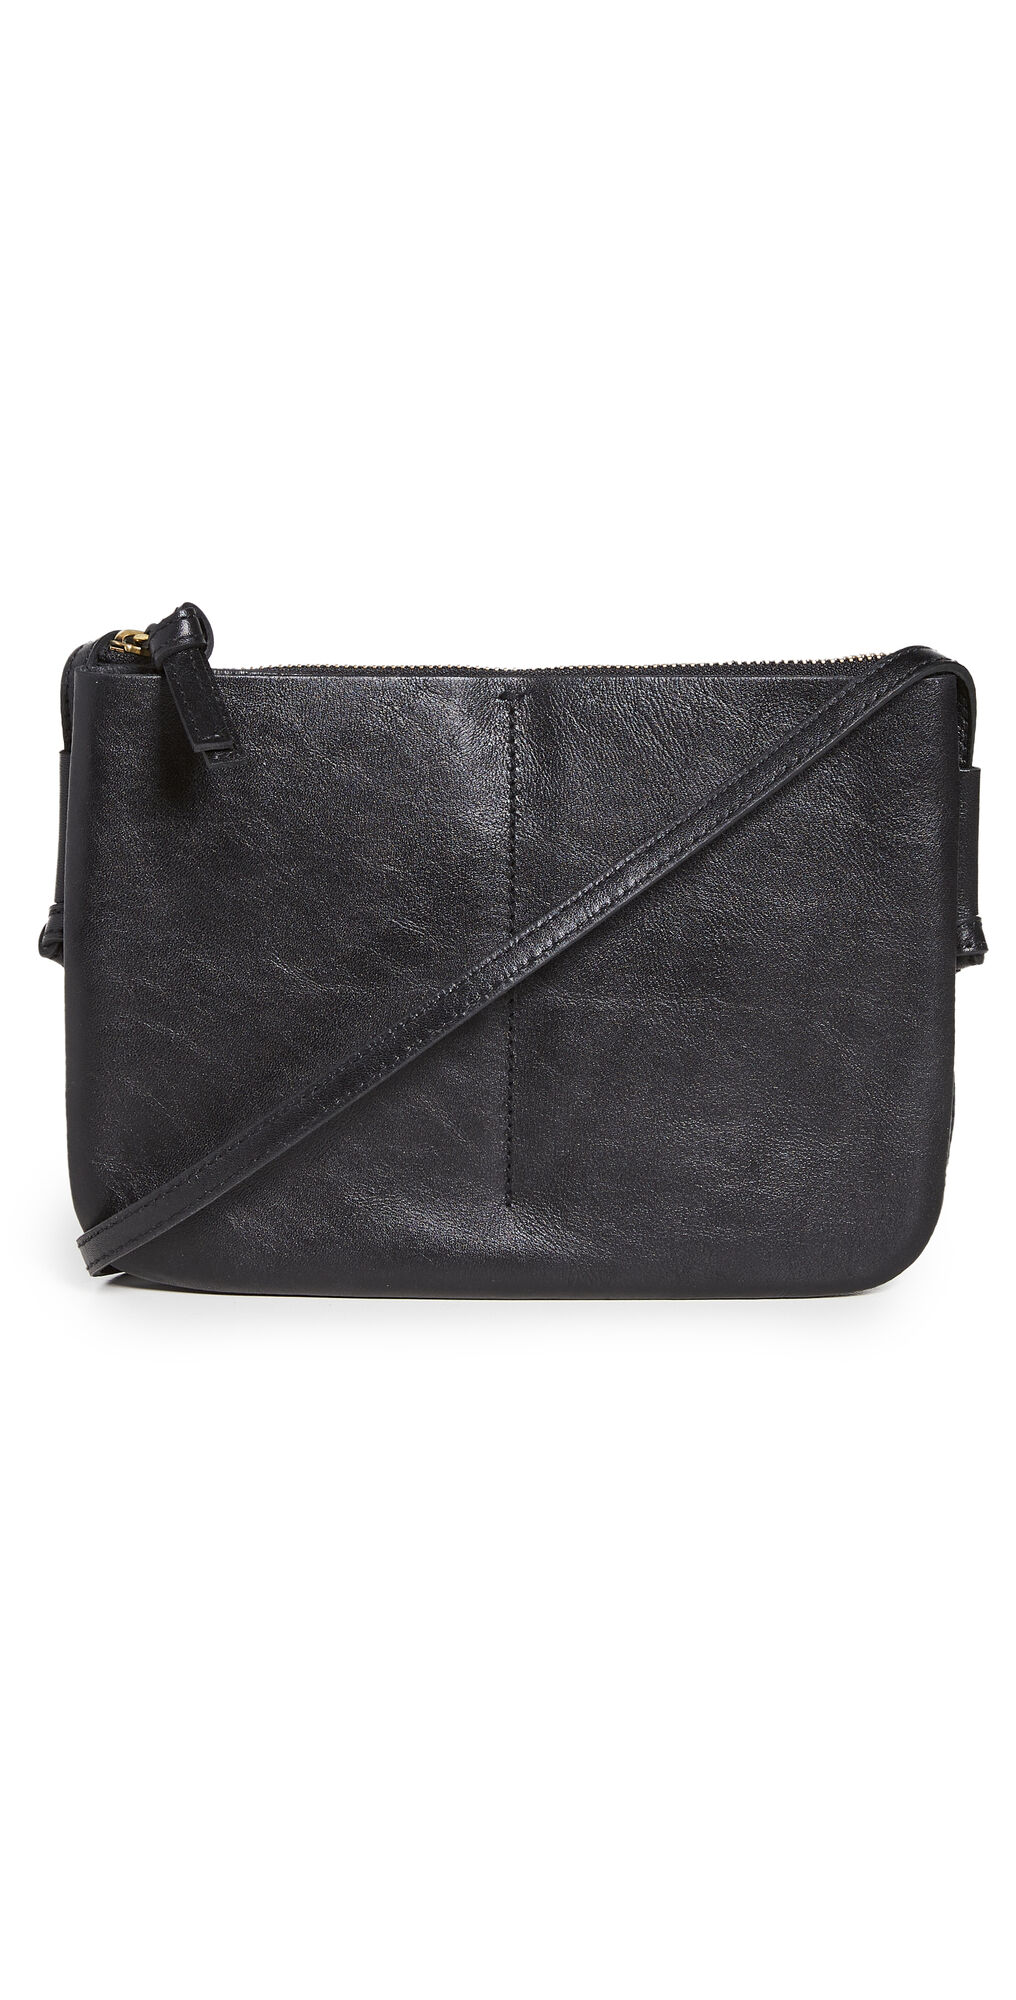 Madewell The Knotted Crossbody Bag True Black One Size  True Black  size:One Size